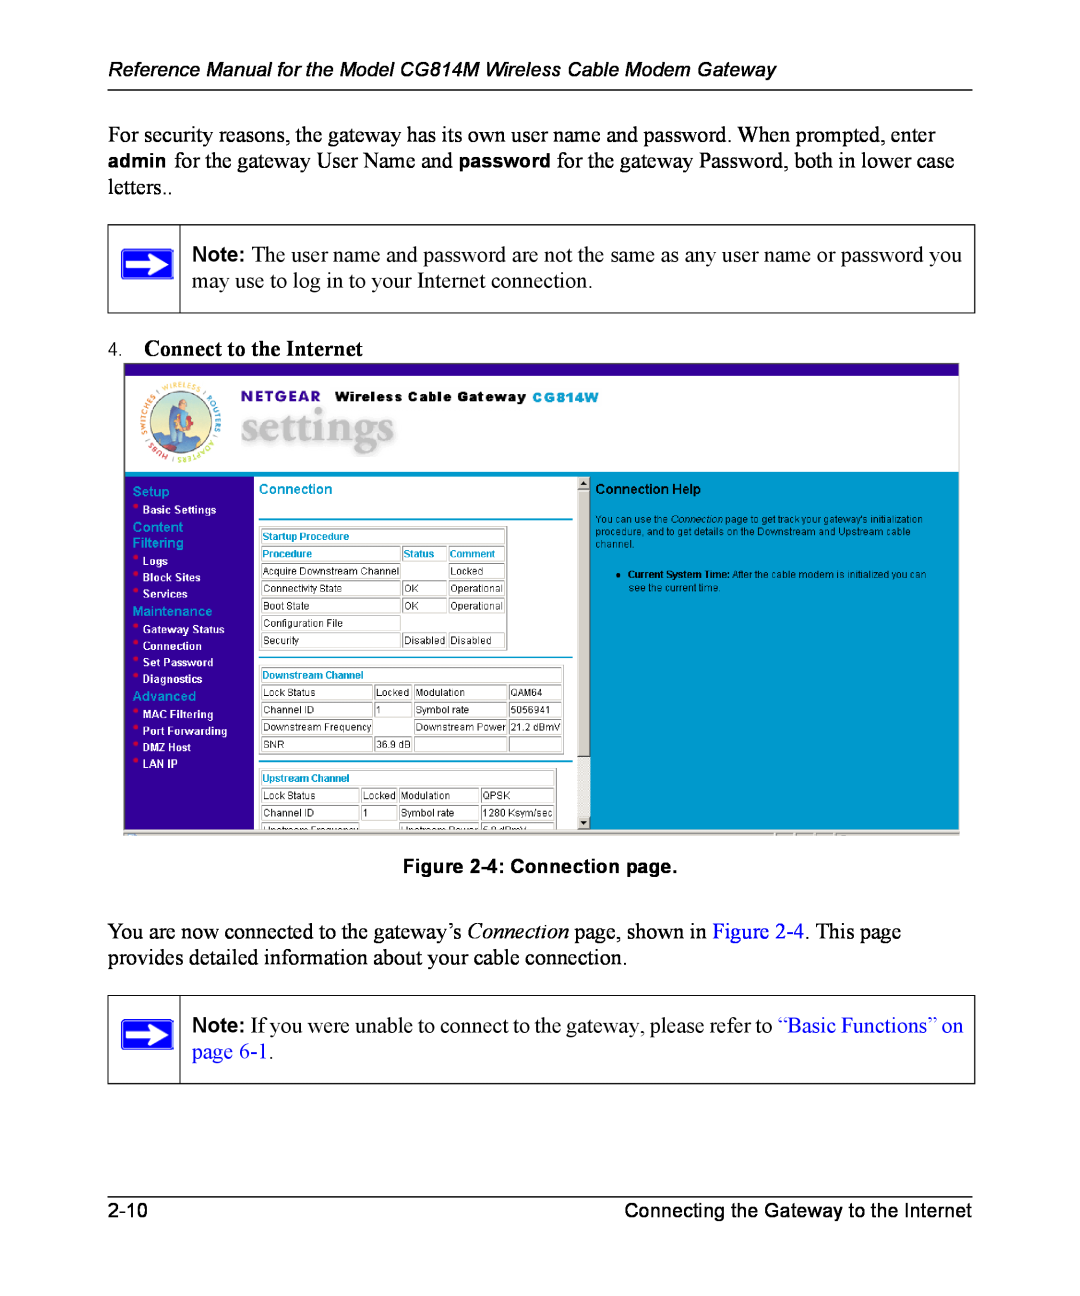 NETGEAR CG814M manual Connect to the Internet, 4 Connection page 